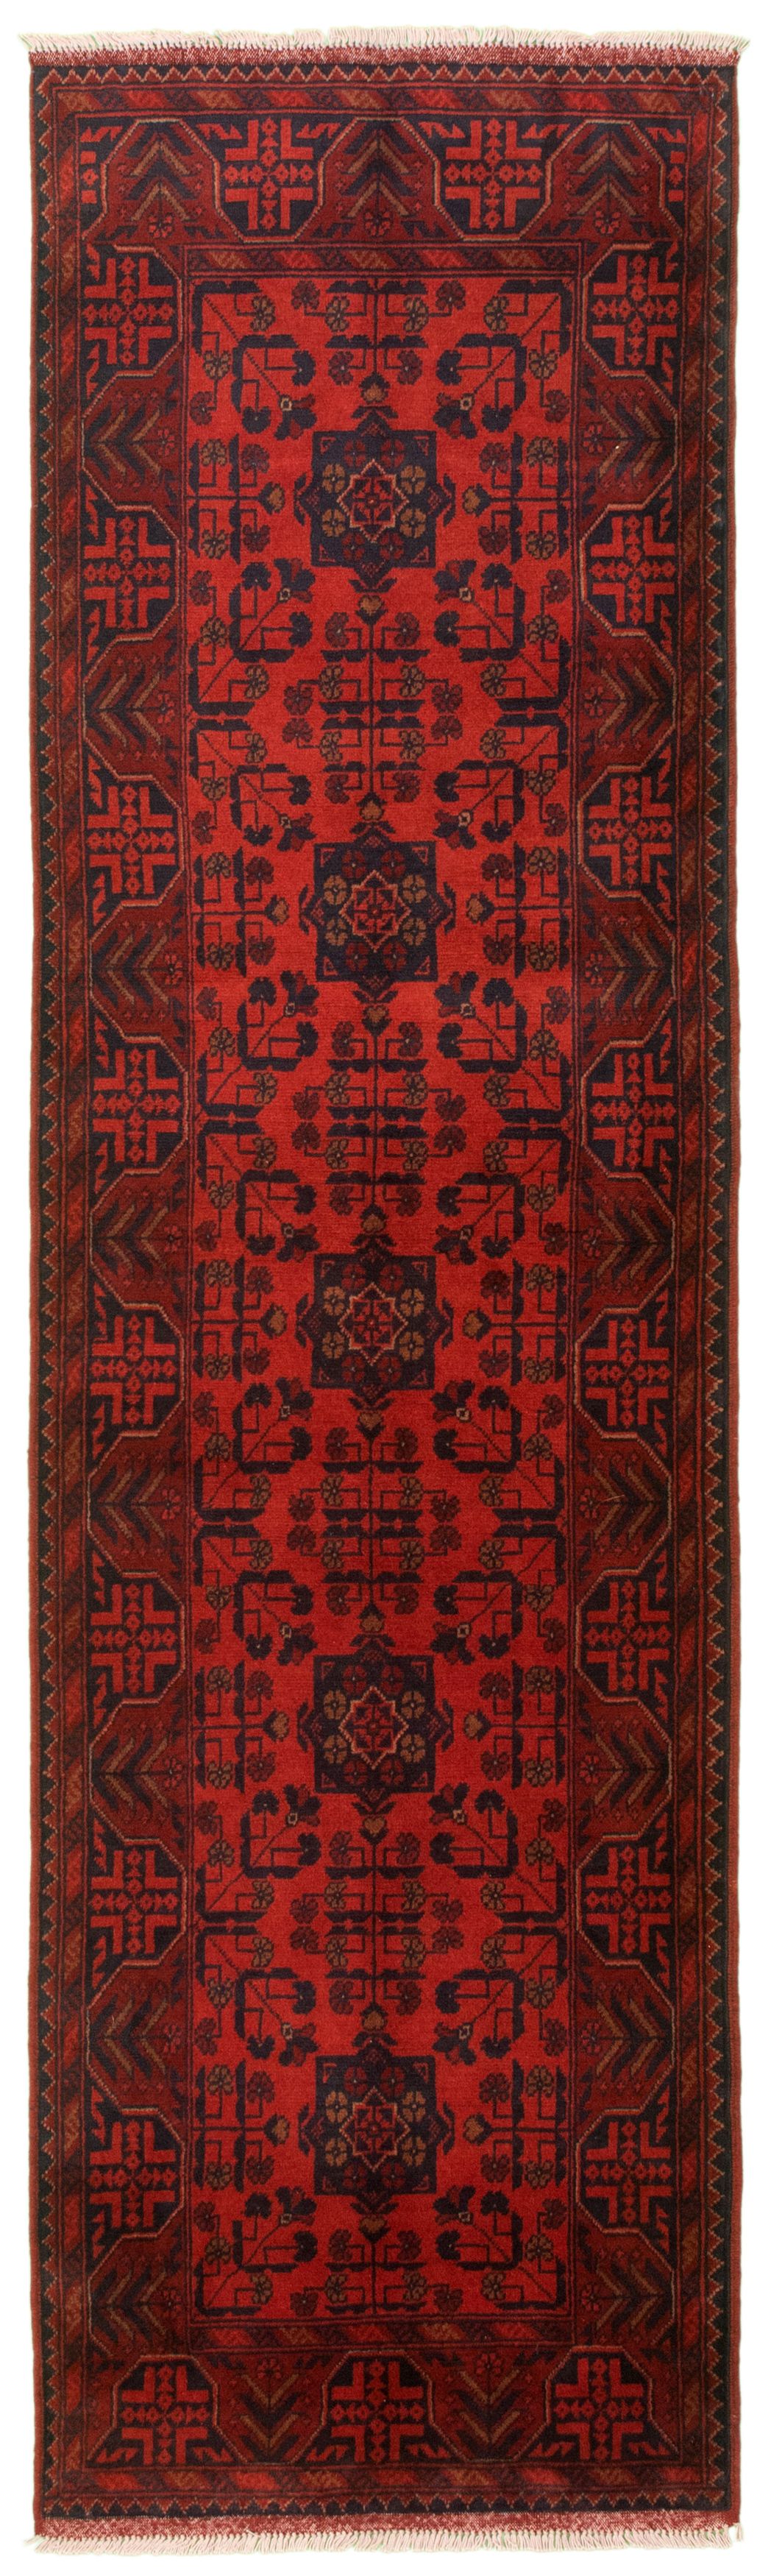 Hand-knotted Finest Khal Mohammadi Red Wool Rug 2'8" x 9'8"  Size: 2'7" x 9'8"  